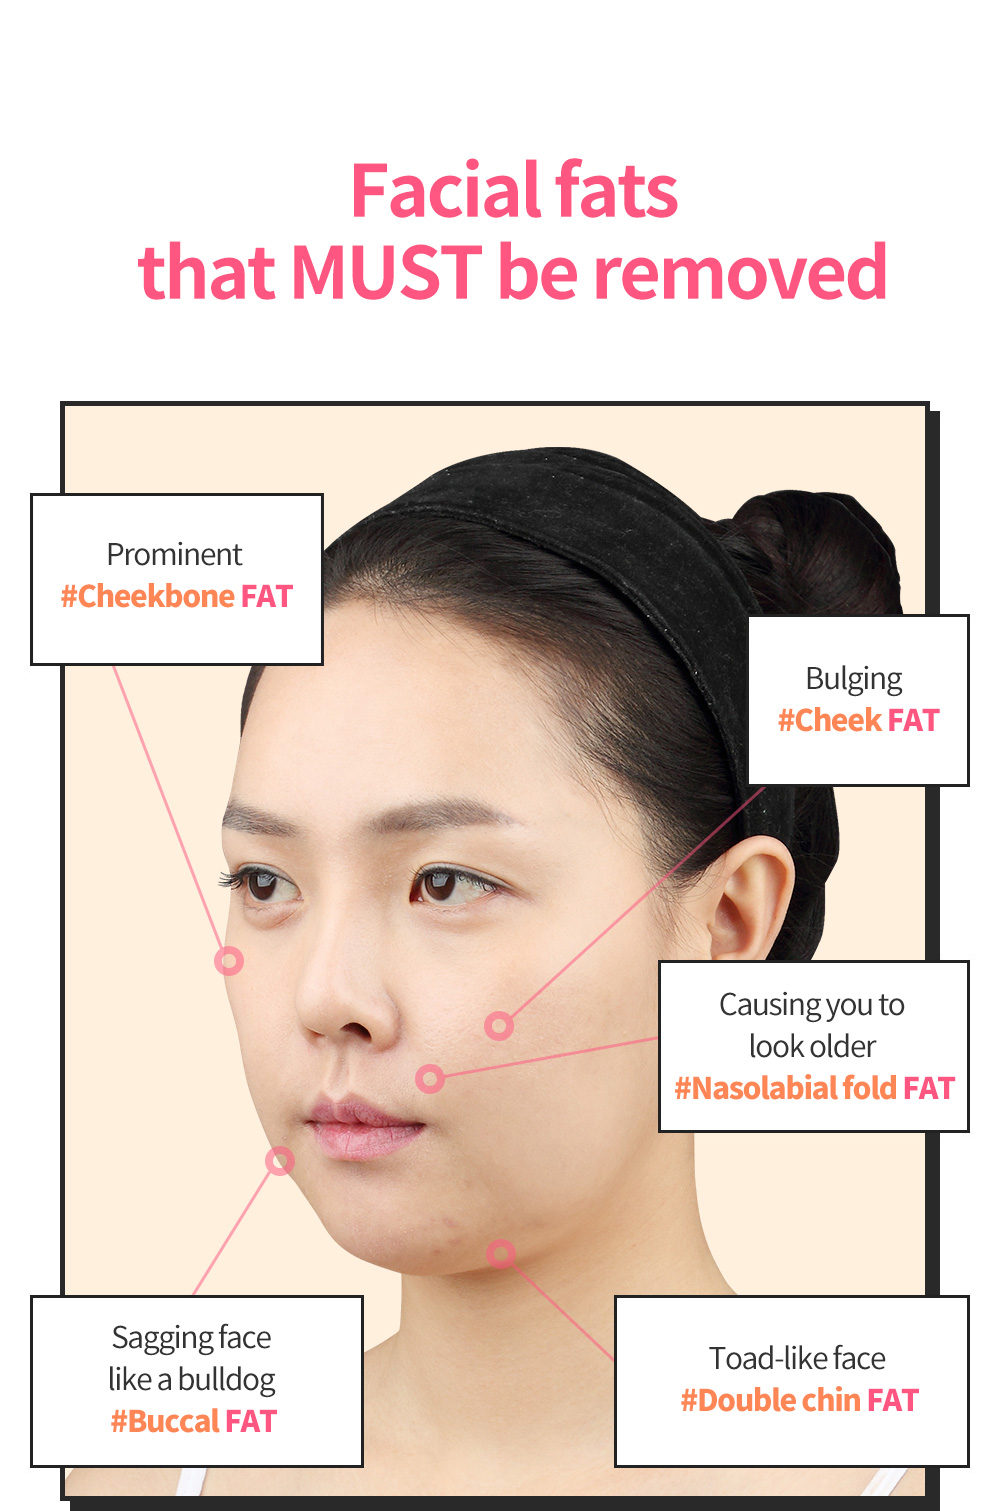 Facial fats that MUST be removed, Prominent #Cheekbone FAT, Sagging face like a bulldog #Buccal FAT, Bulging  #Cheek FAT, Causing you to look older #Nasolabial fold FAT, Toad-like face #Double chin FAT